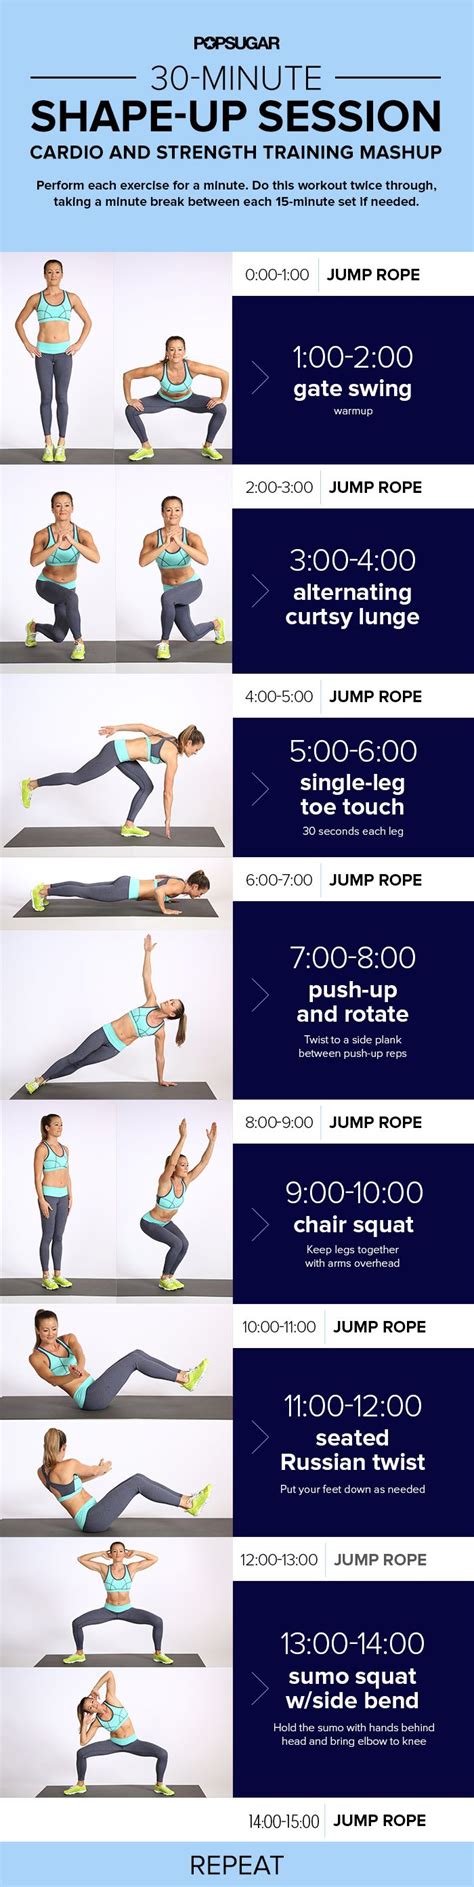 27 hourglass body workouts that will give you an amazing fit body trimmedandtoned